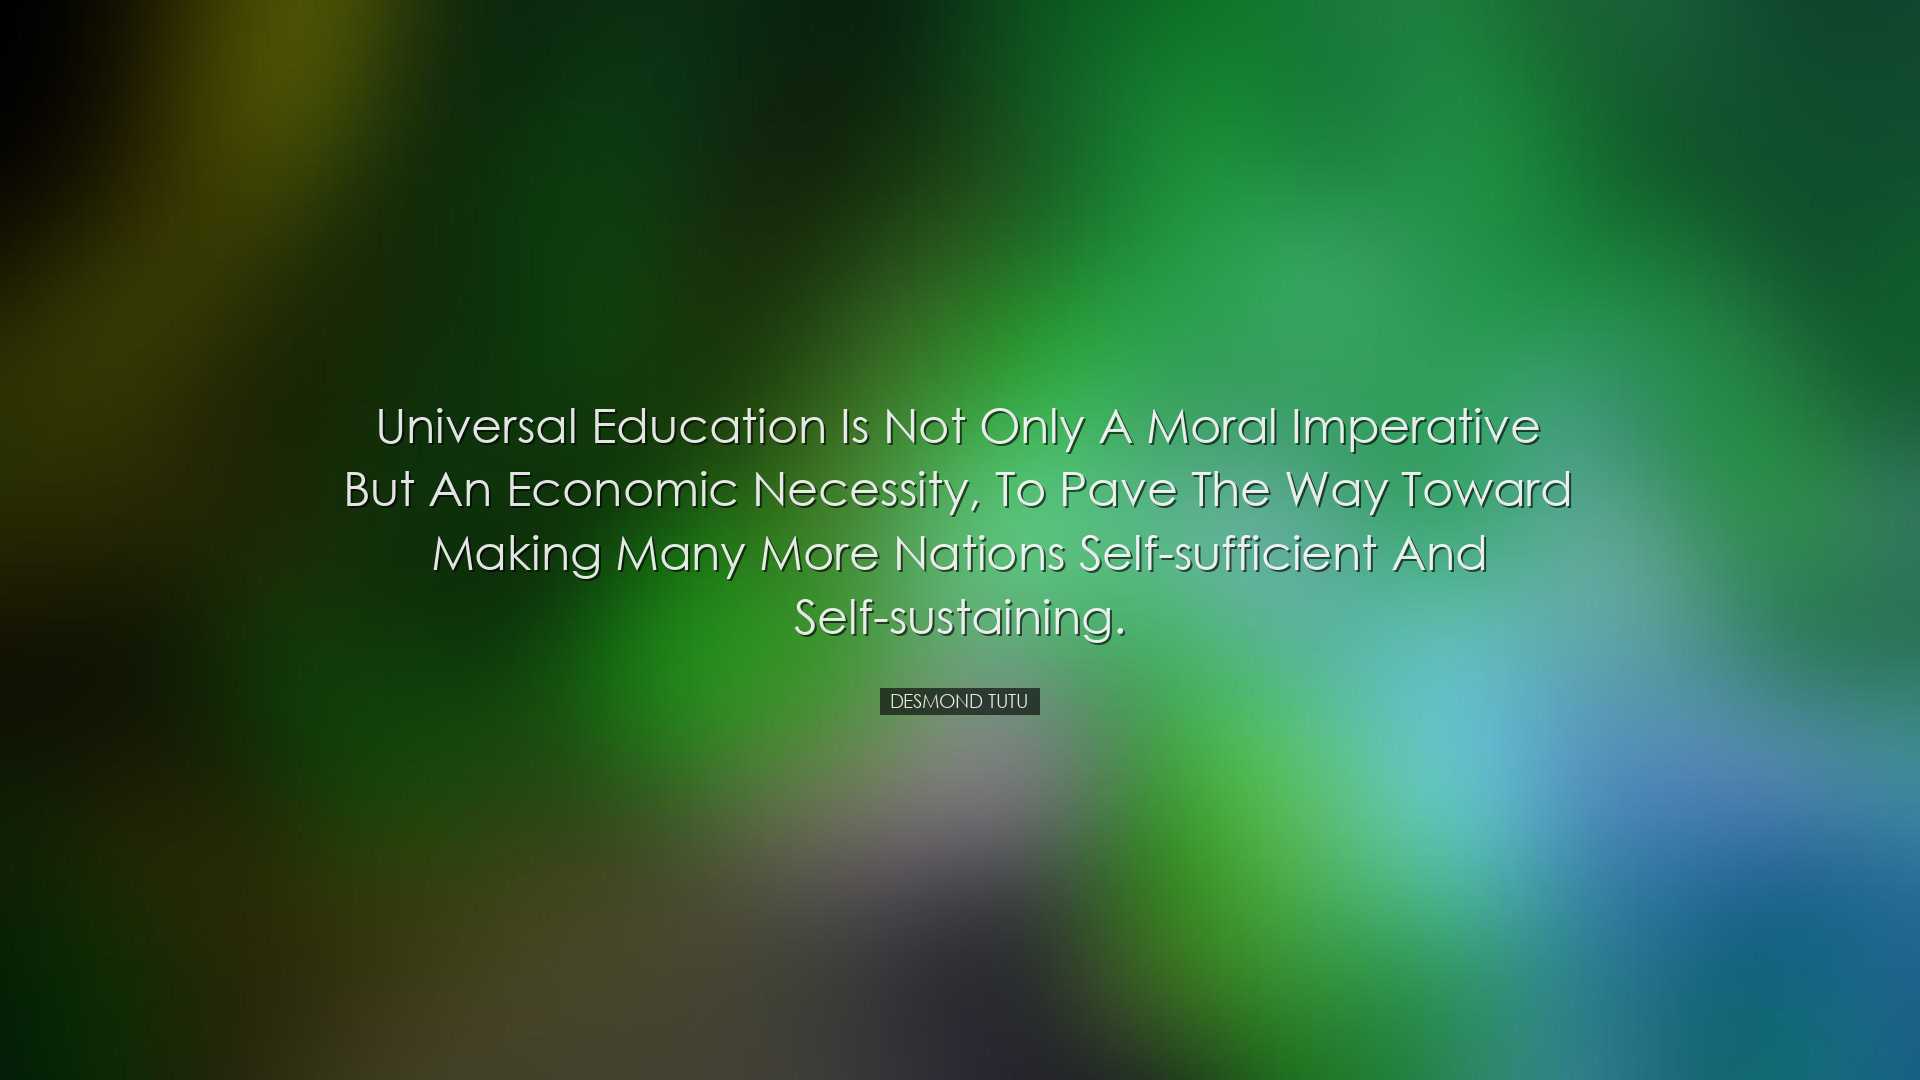 Universal education is not only a moral imperative but an economic